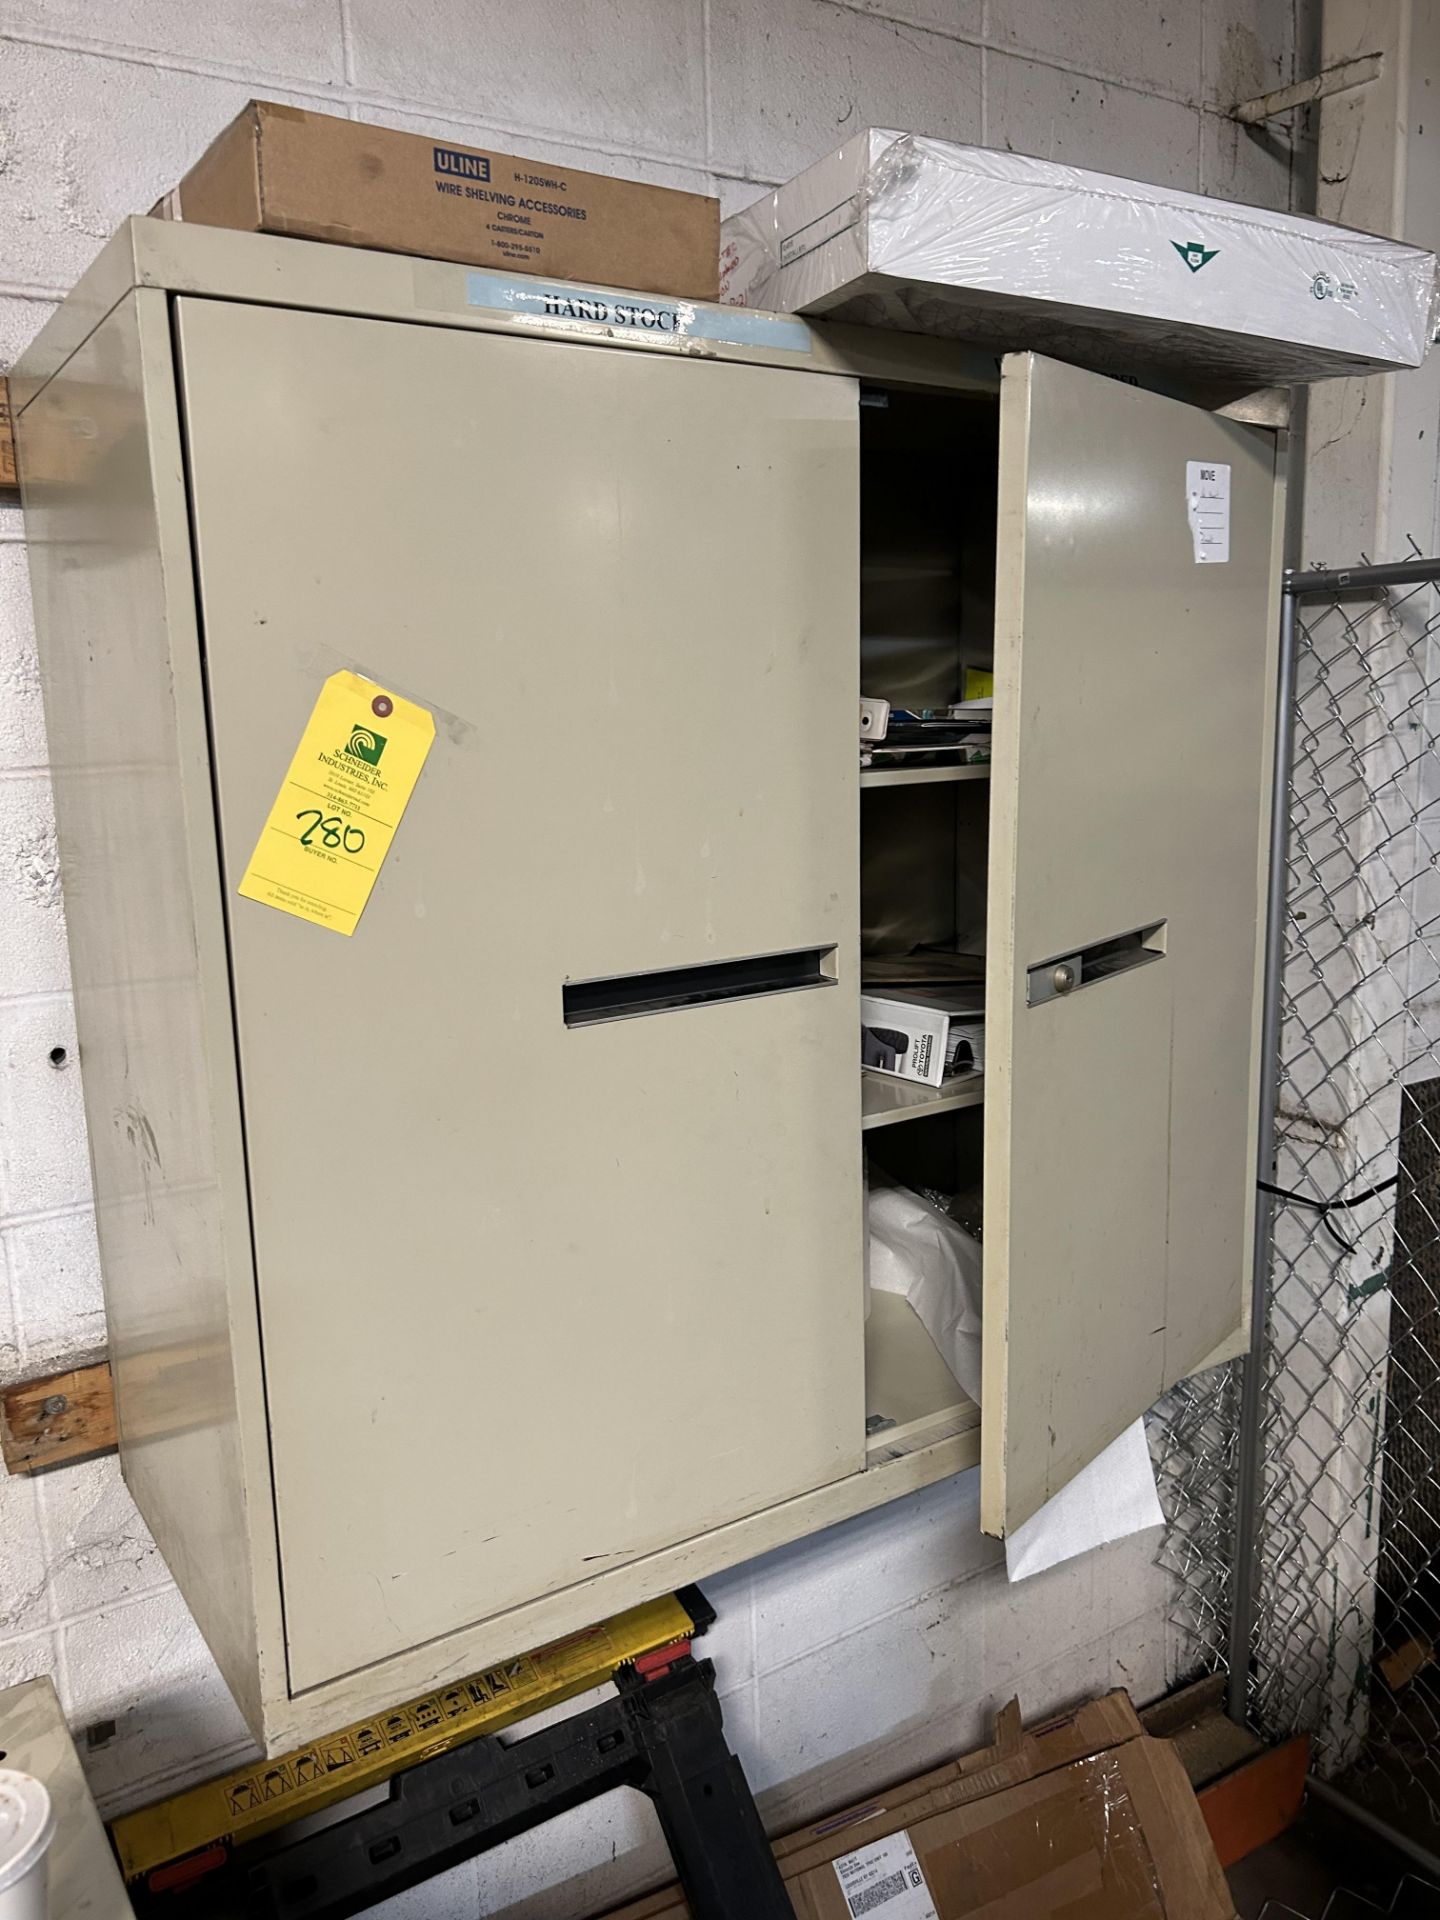 Beige Storage Cabinet, 18'' x 39'' x 42'' (No Contents), Rigging/Loading Fee: $40